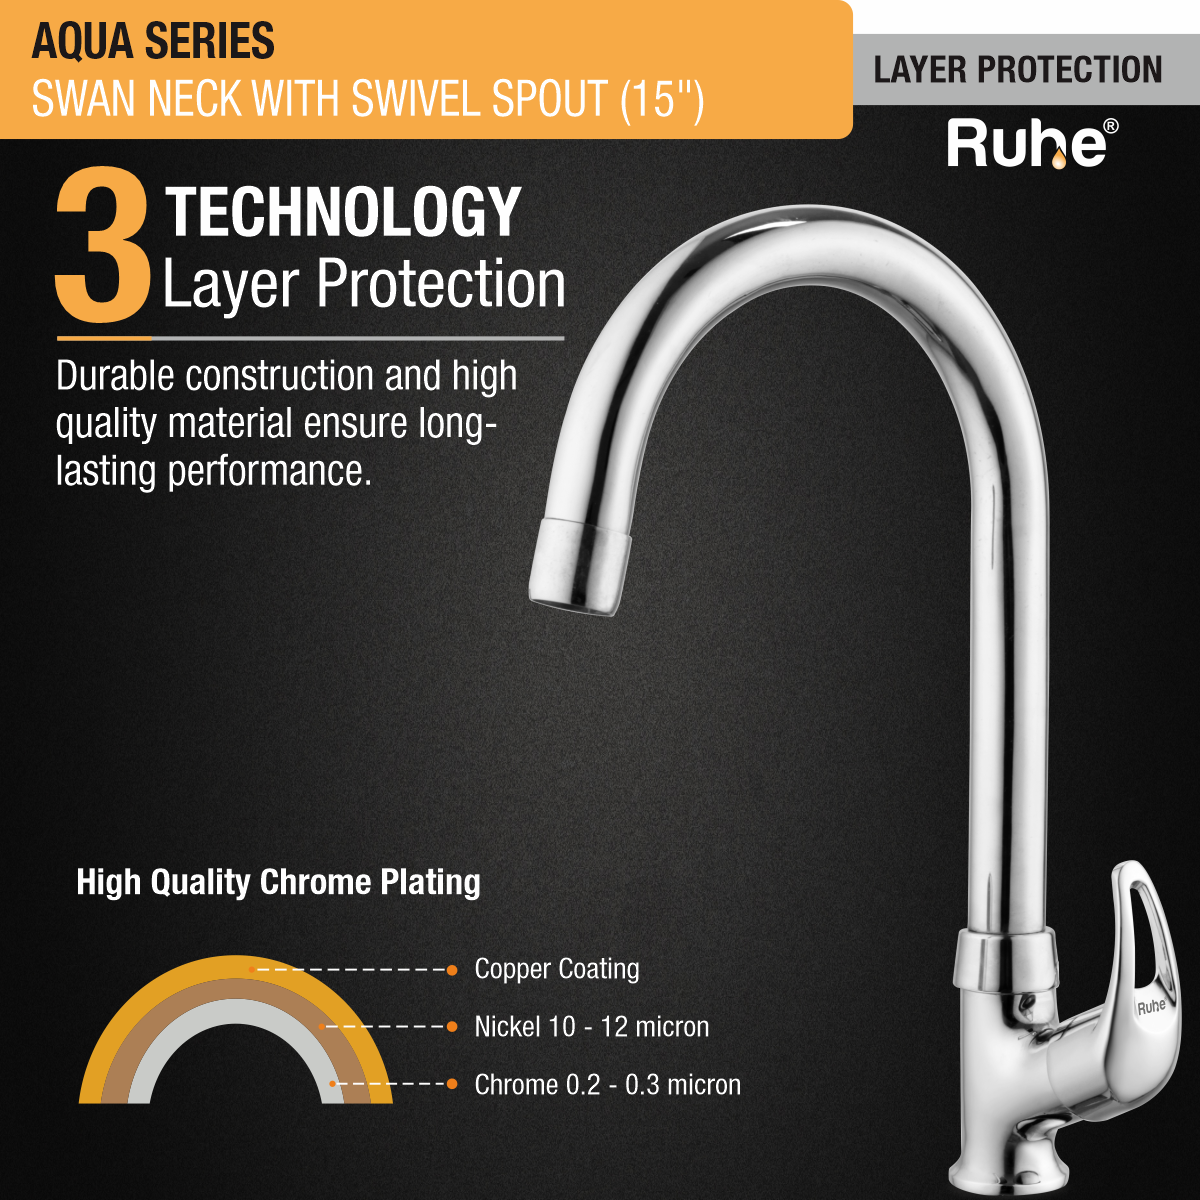 Aqua Swan Neck with Medium (15 inches) Round Swivel Spout Faucet 3 layer protection